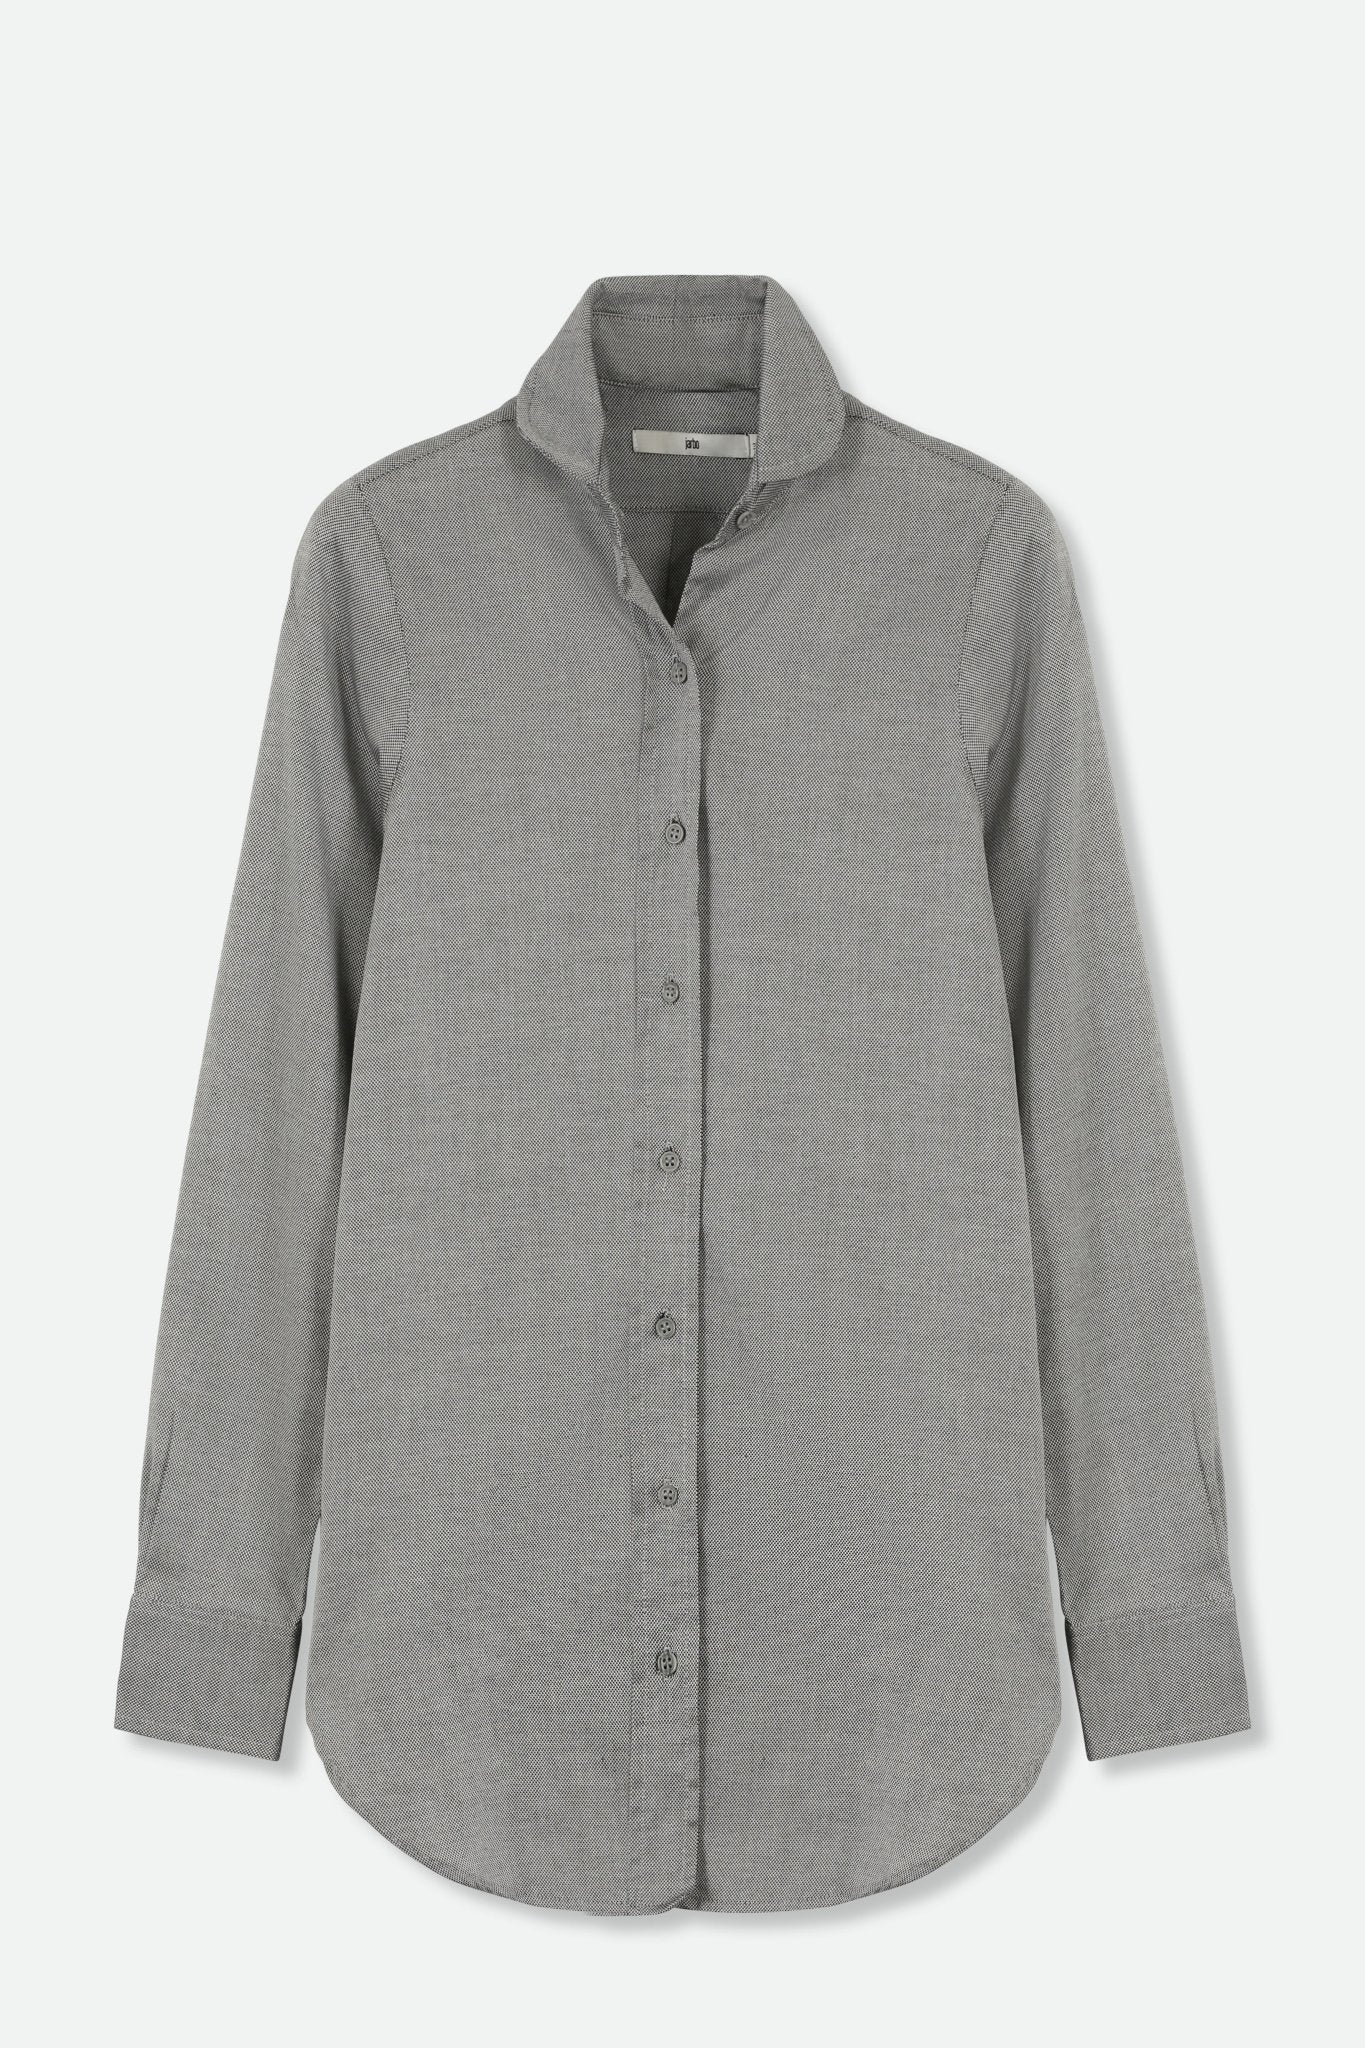 TRIESTE ROUNDED COLLARED SHIRT IN COTTON - Jarbo